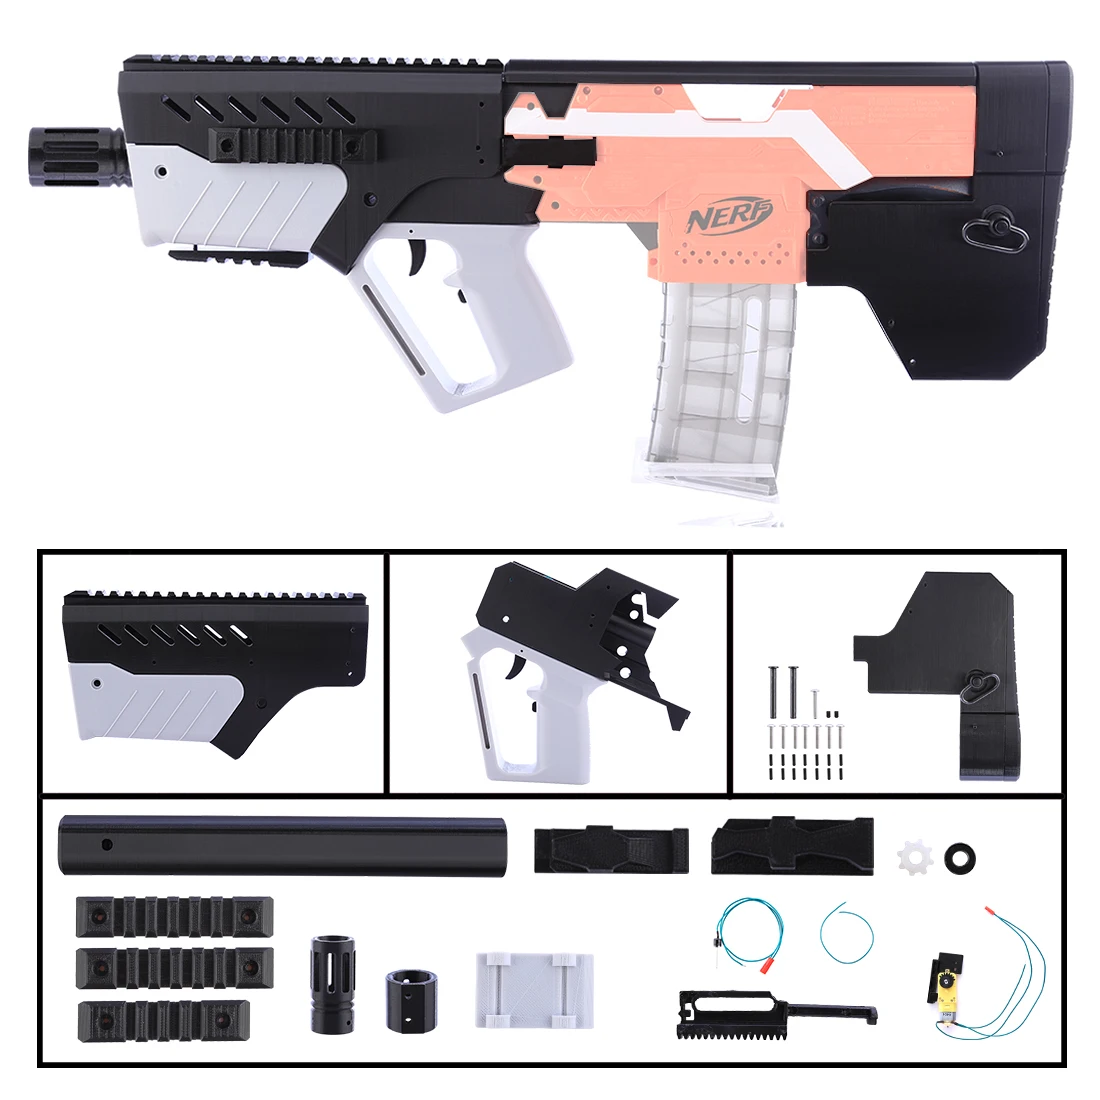 

XSW STF Appearance Fully Automatic MXD-1 Refit Kit for Nerf stryfe - Black + Gray